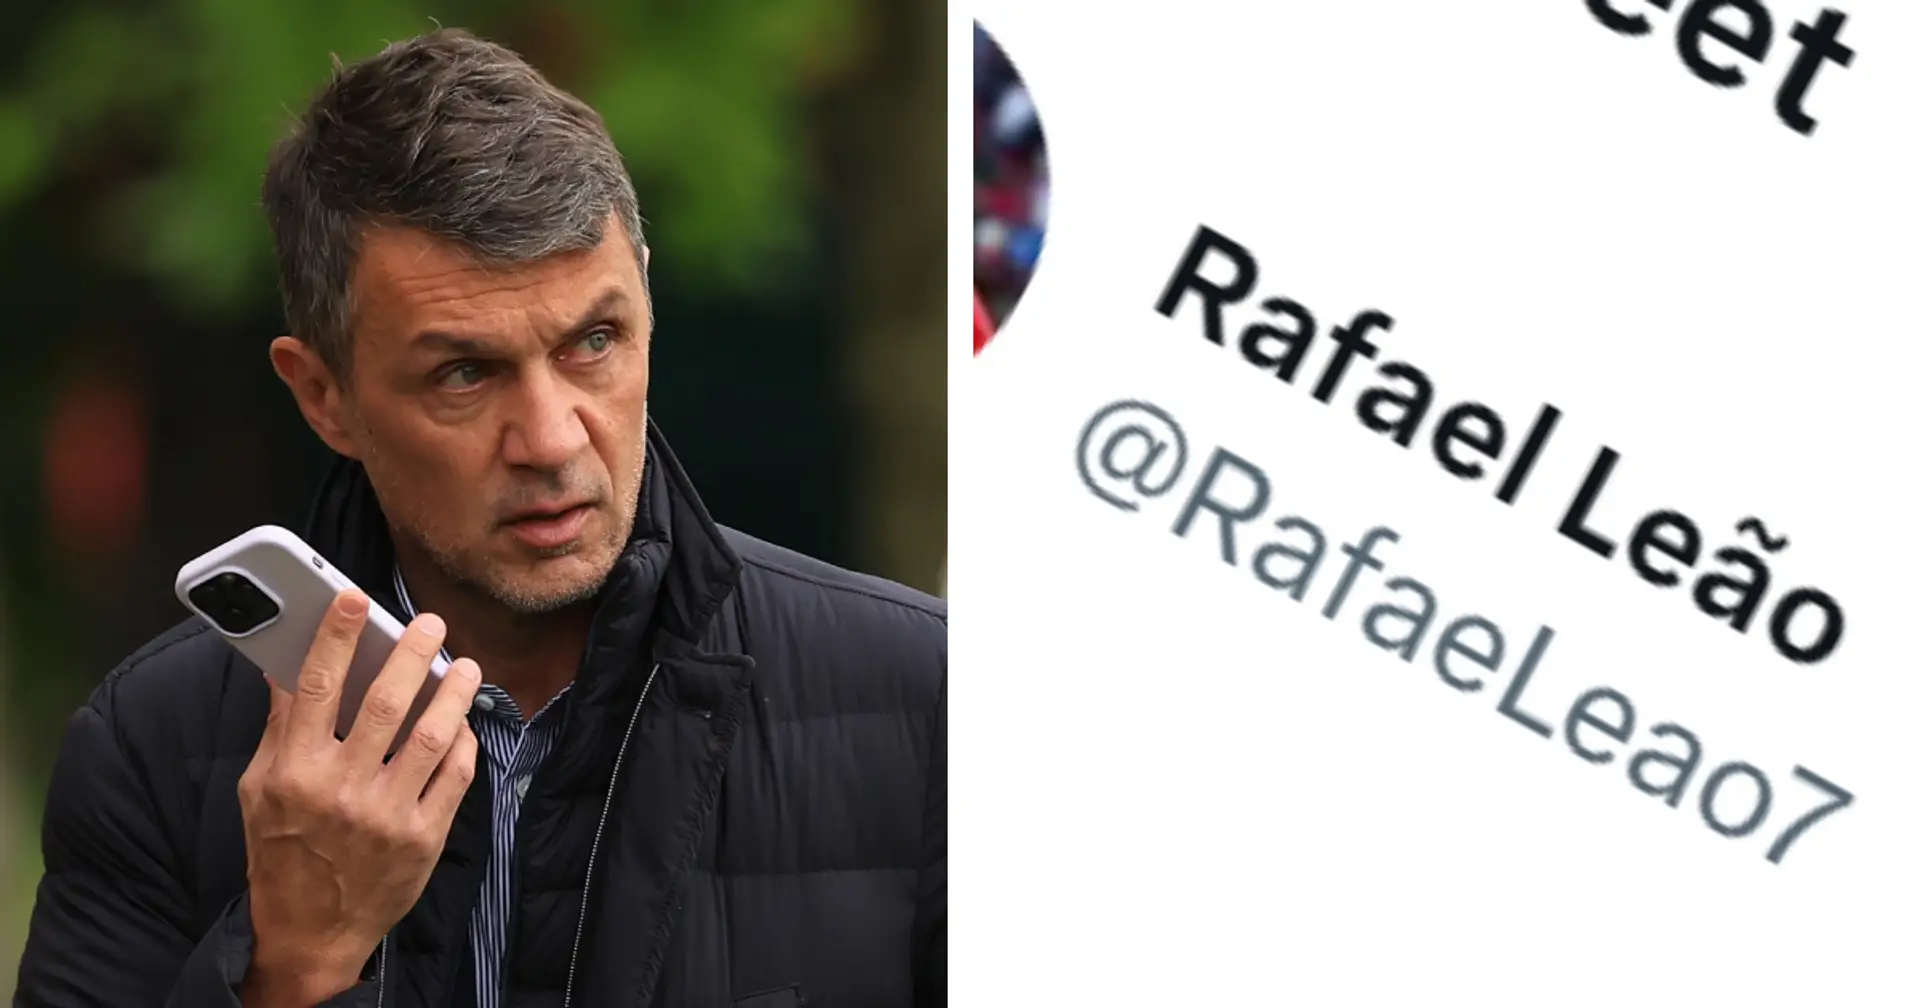 Chaos in Milan: Rafael Leao reacts after club shockingly sack Paulo Maldini two days after his contract extension 